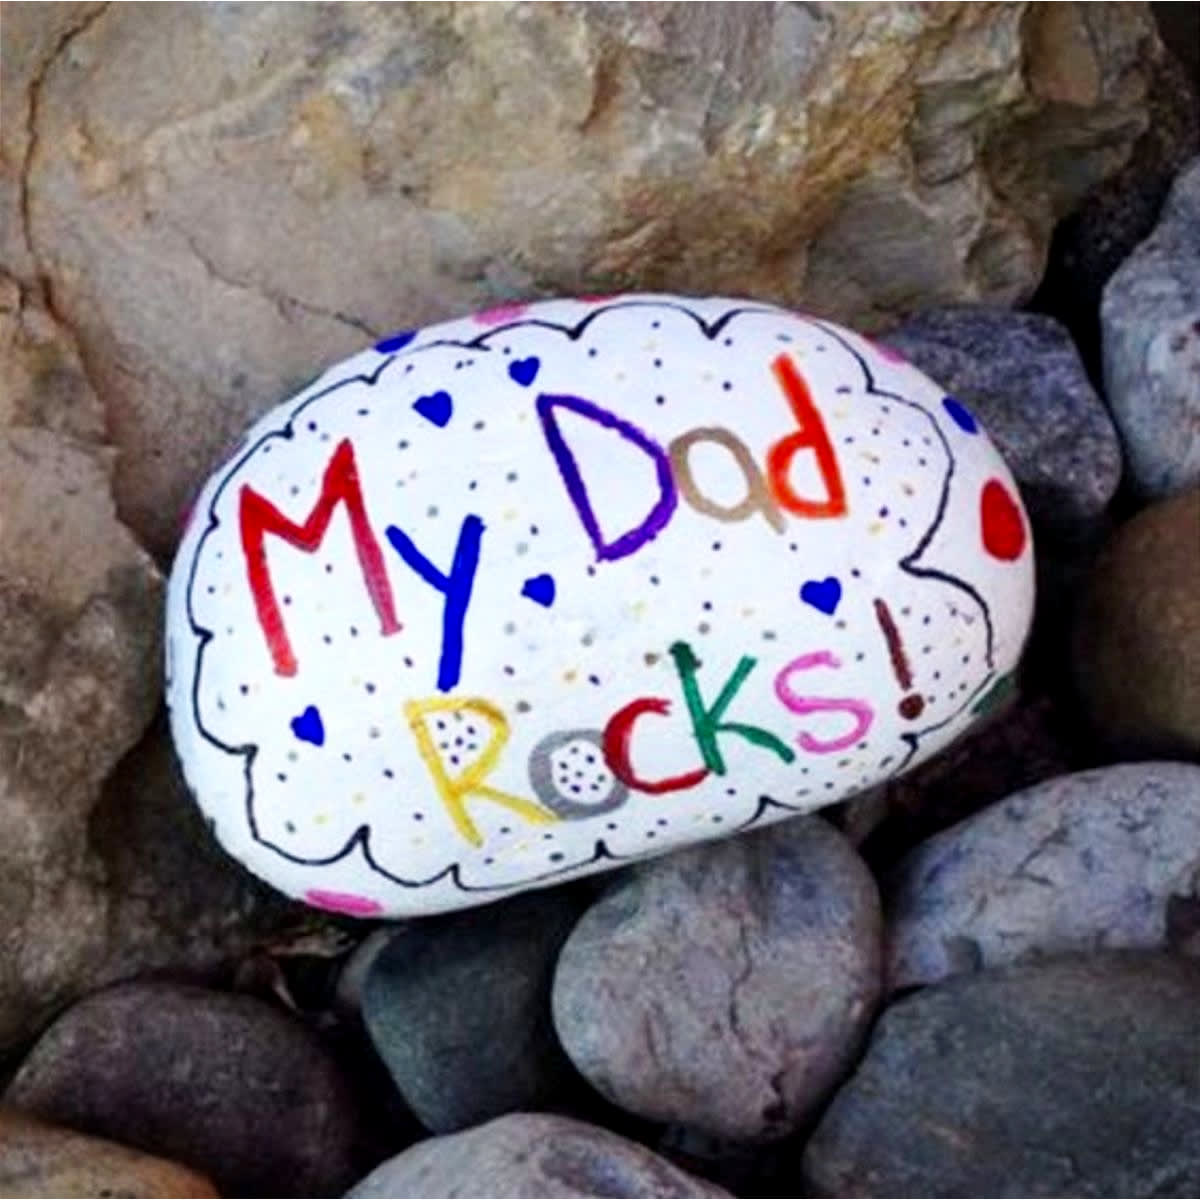 Fathers Day Gifts From Kids - Easy Fathers Day Crafts For Kids